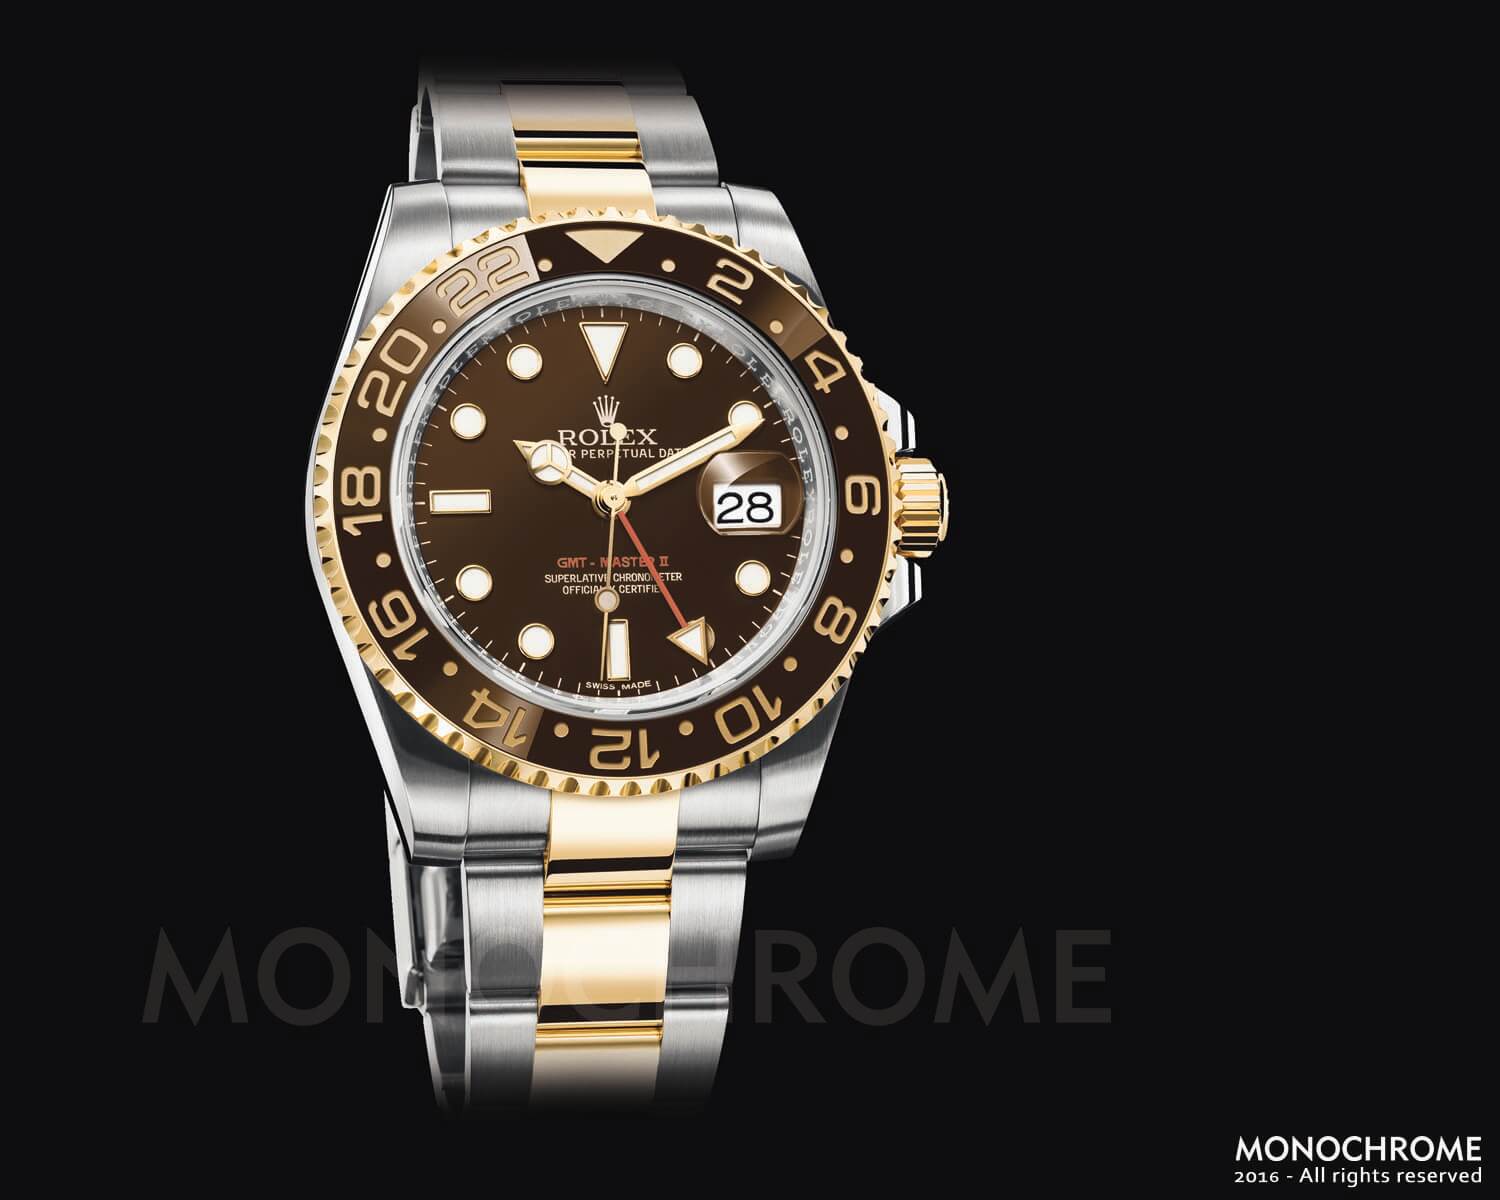 Rolex-GMT-Master-II-Two-Tone-Root-Beer-Rolex-Baselworld-2016-Rolex-Predictions-2016-2-Monochrome